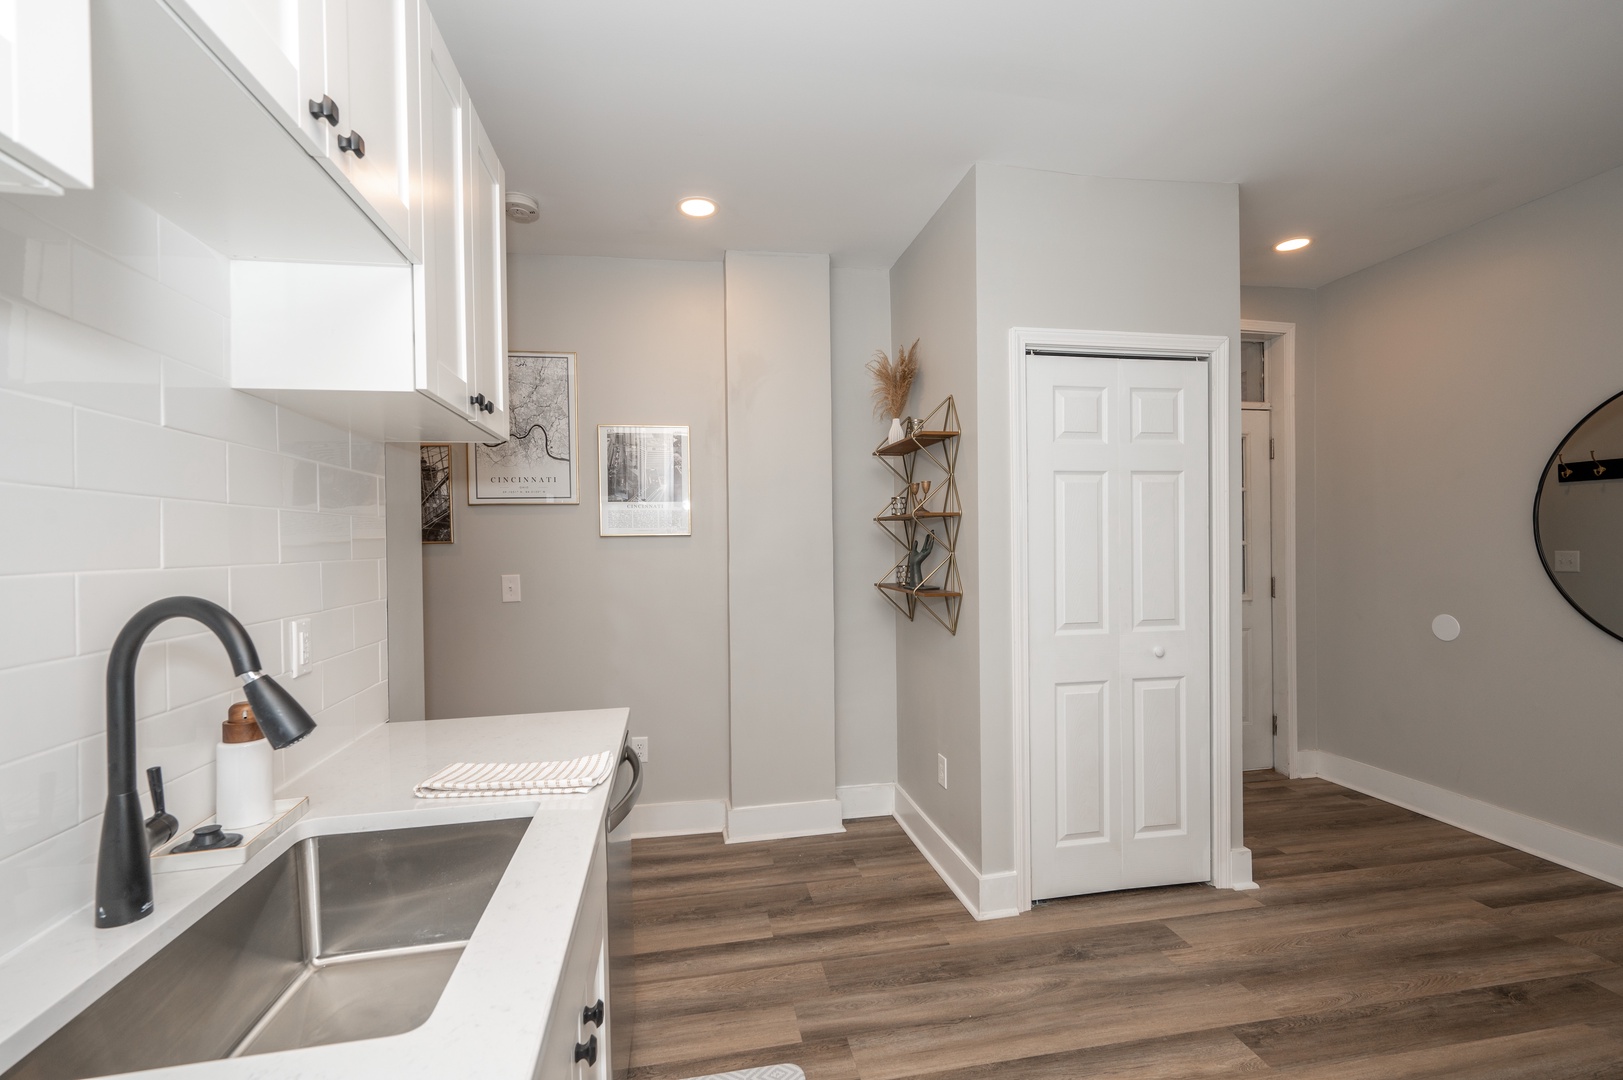 Apt 1 – The kitchen is spacious & well equipped for your visit to Covington